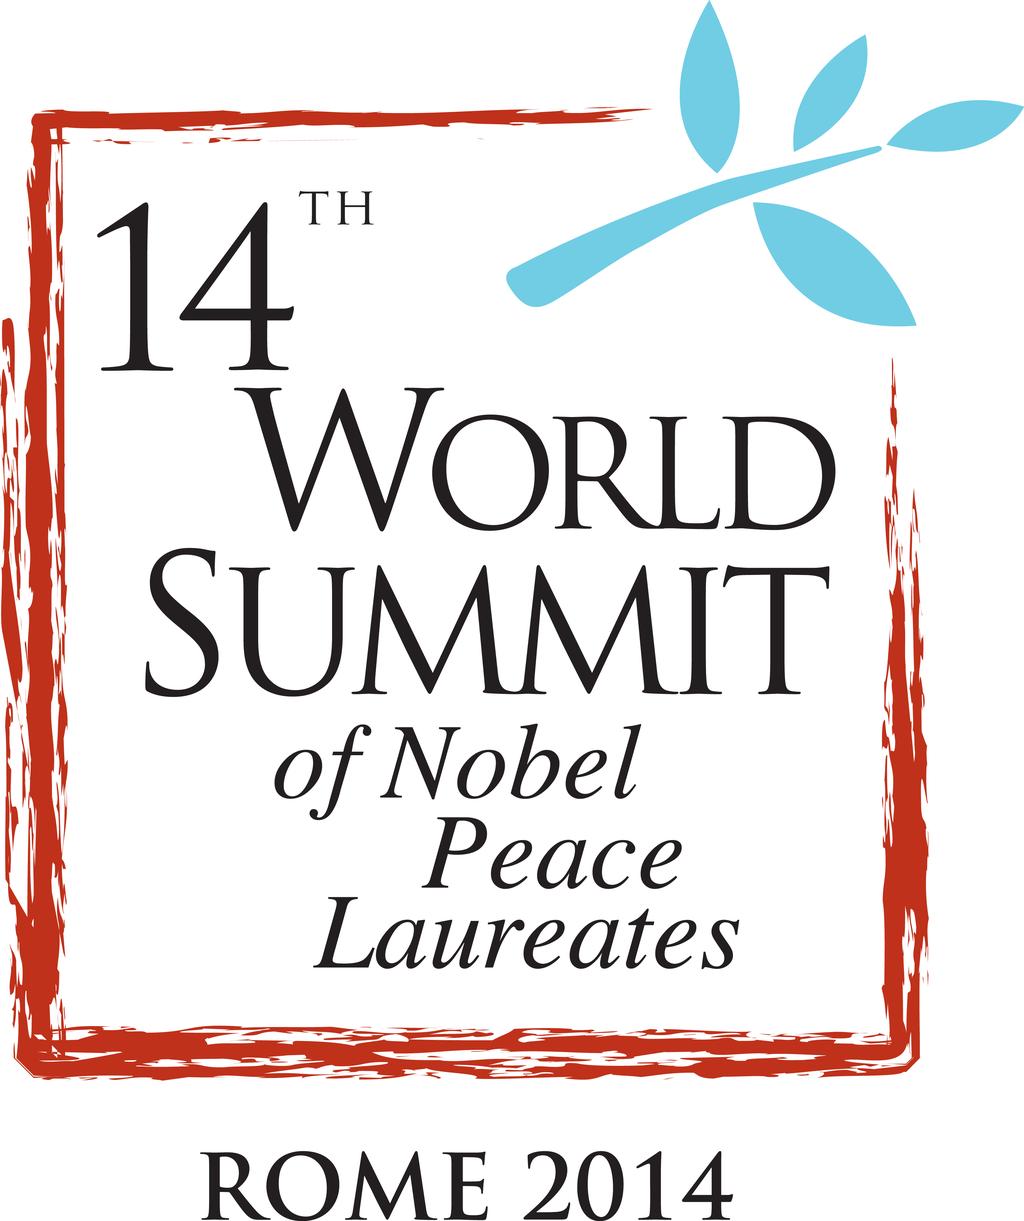 The Nobel Peace Laureates and Peace Laureate Organizations, gathered in Rome for the 14th World Summit of Nobel Peace Laureates from 12 14 December, 2014 have issued the following declaration